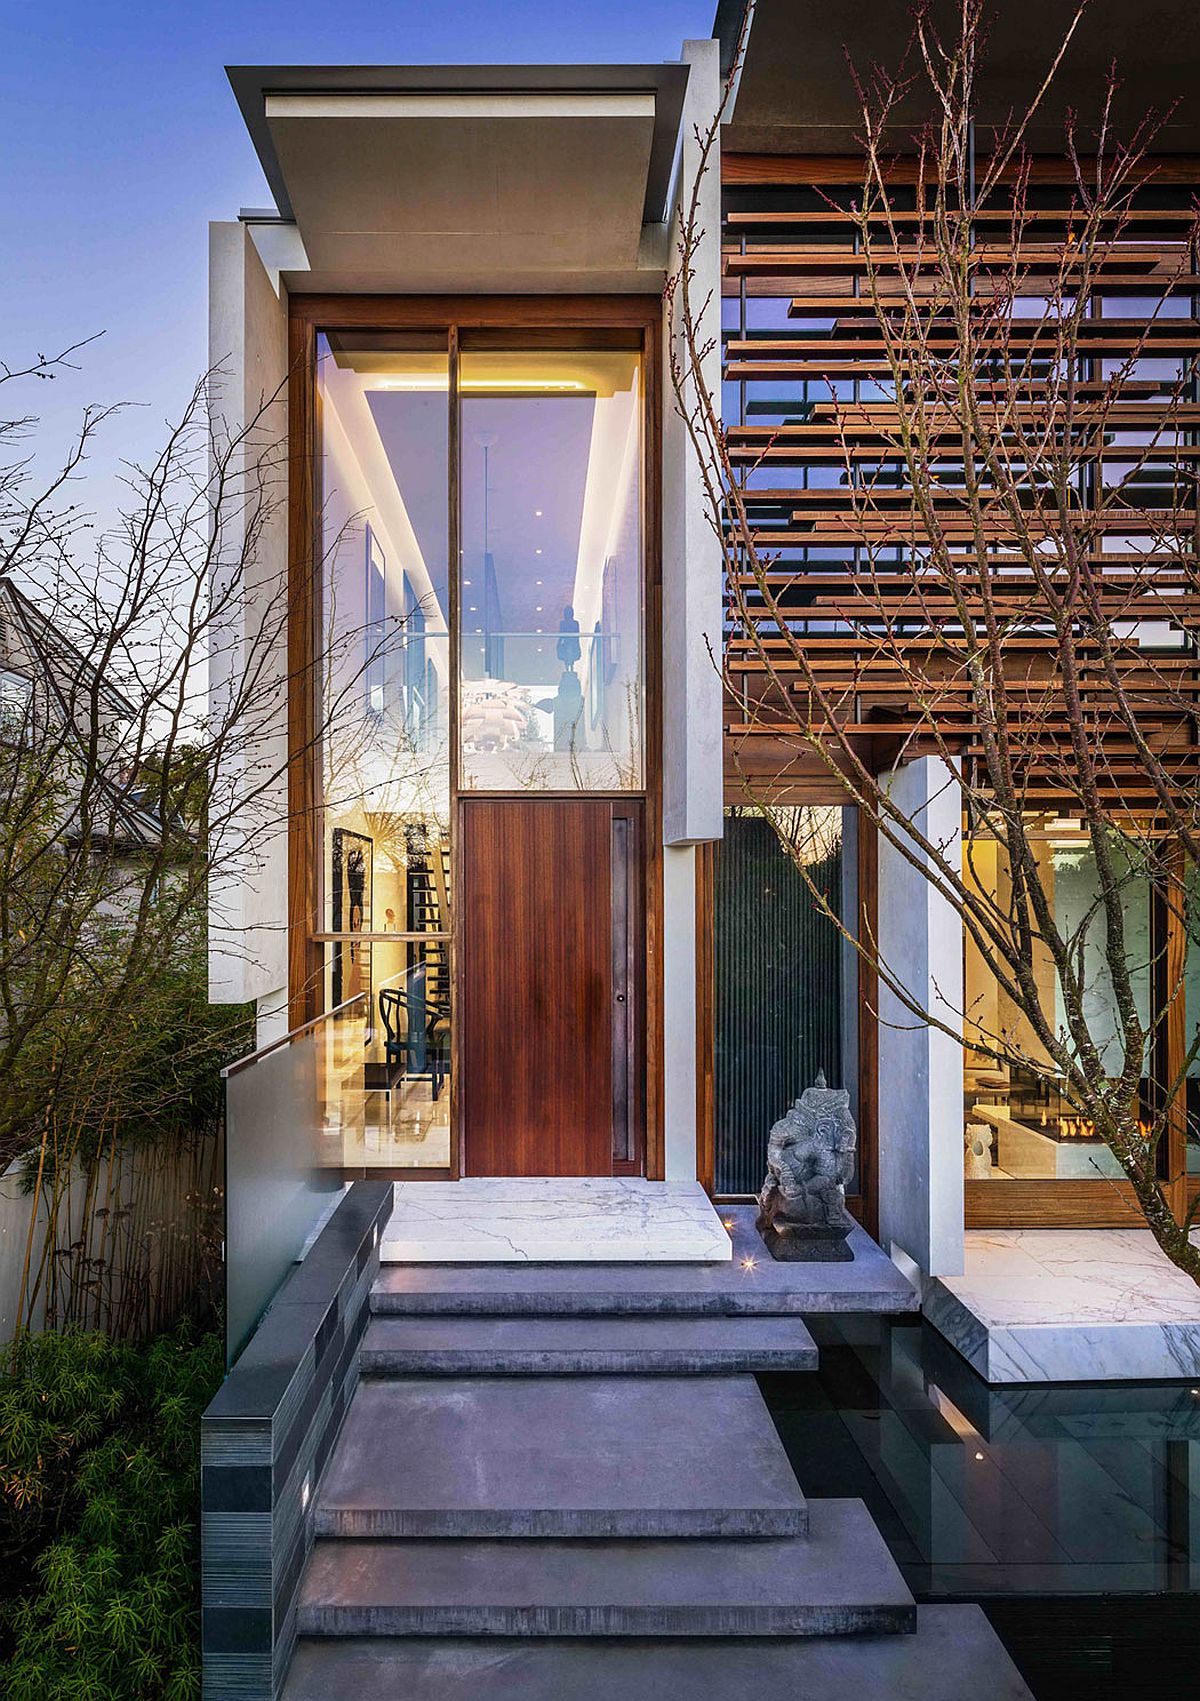 Stone-and-reflecting-pod-give-the-entrance-a-serene-inviting-vibe